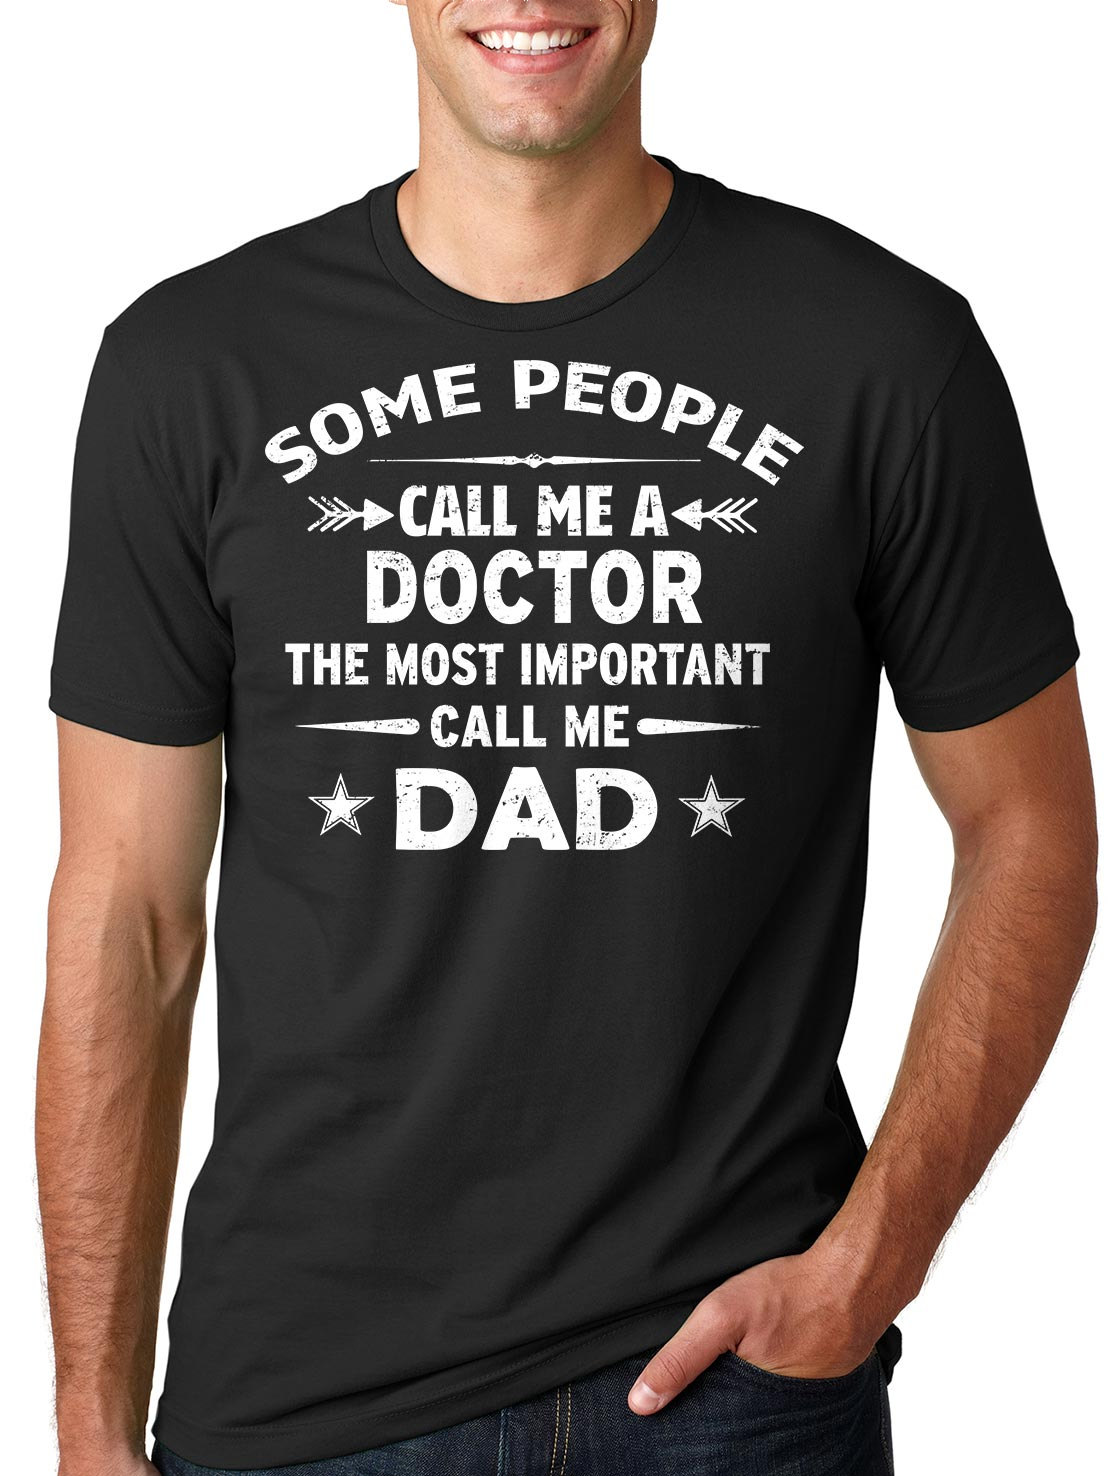 Affirming Cute and Comfortable Statement Shirt for Doctor Dads